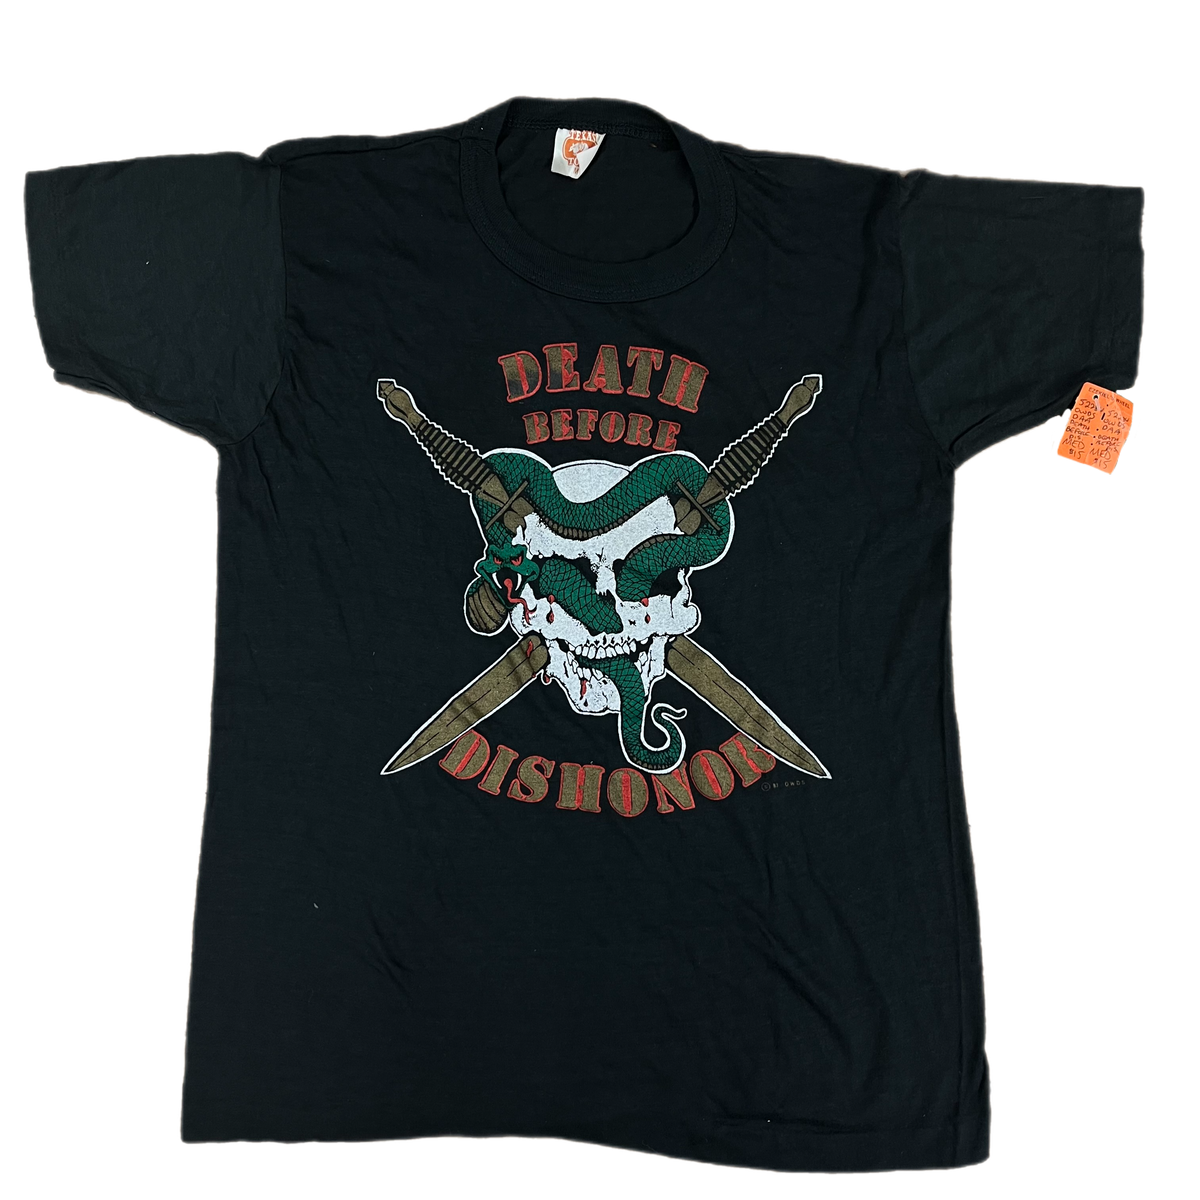 Vintage Death Before Dishonor “‘83” T-Shirt